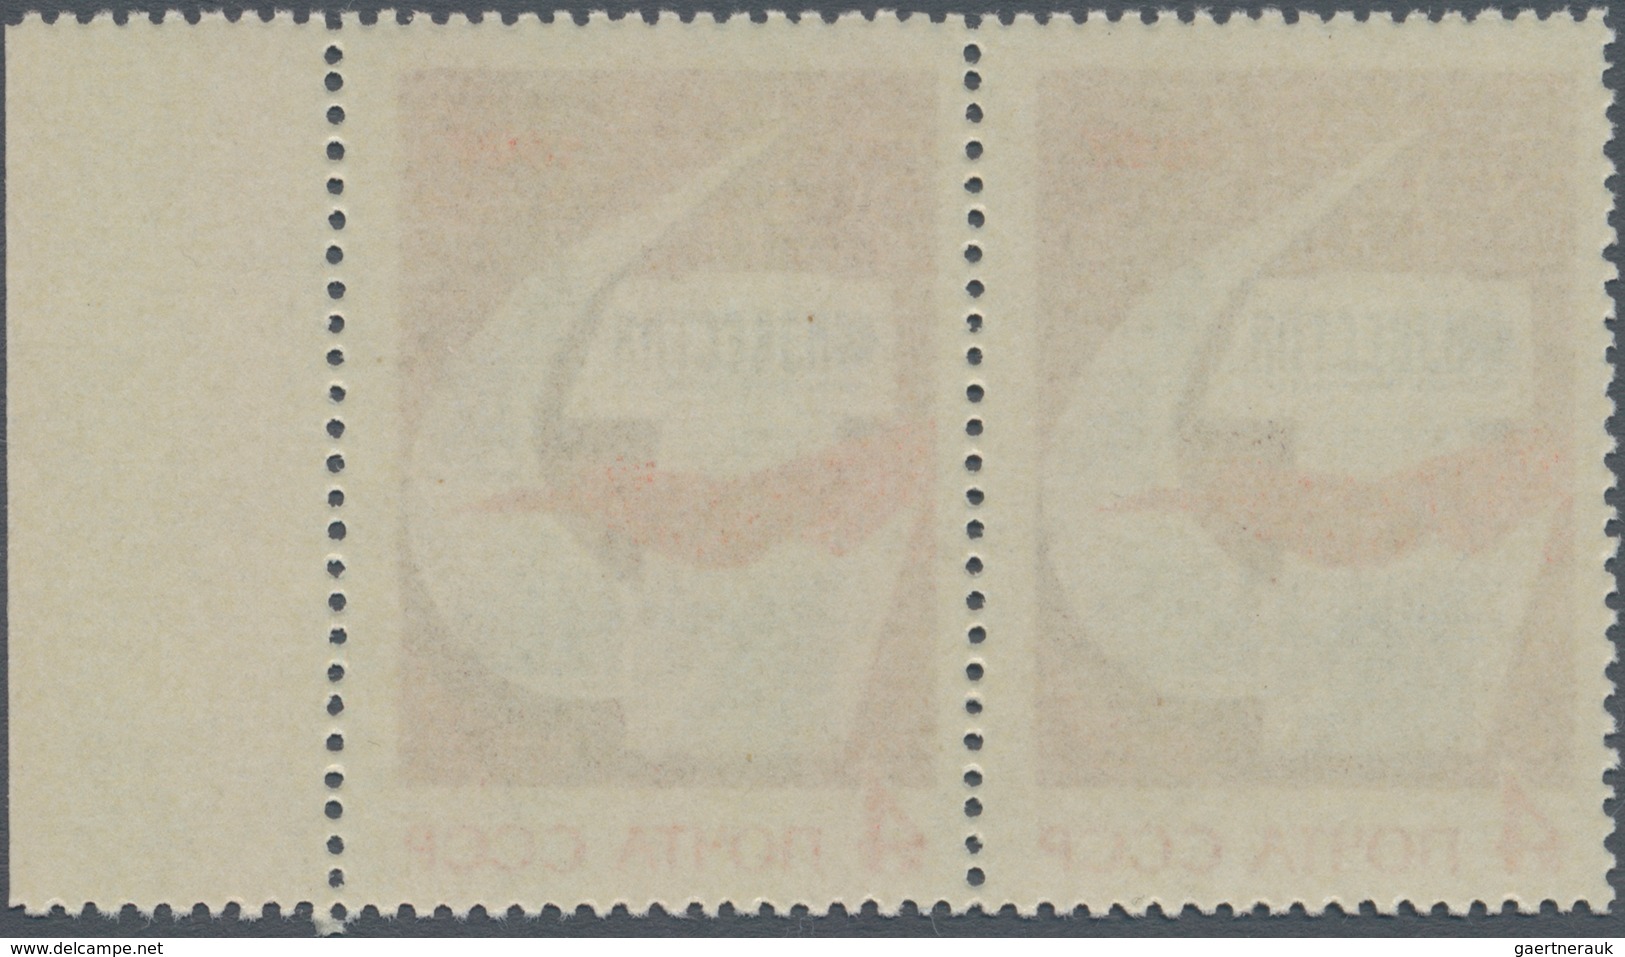 Sowjetunion: 1967 PROOF PAIR Of 'Iswestija' 4k. Showing Addition 'Lenin' Medal Etc., With Sheet Marg - Covers & Documents